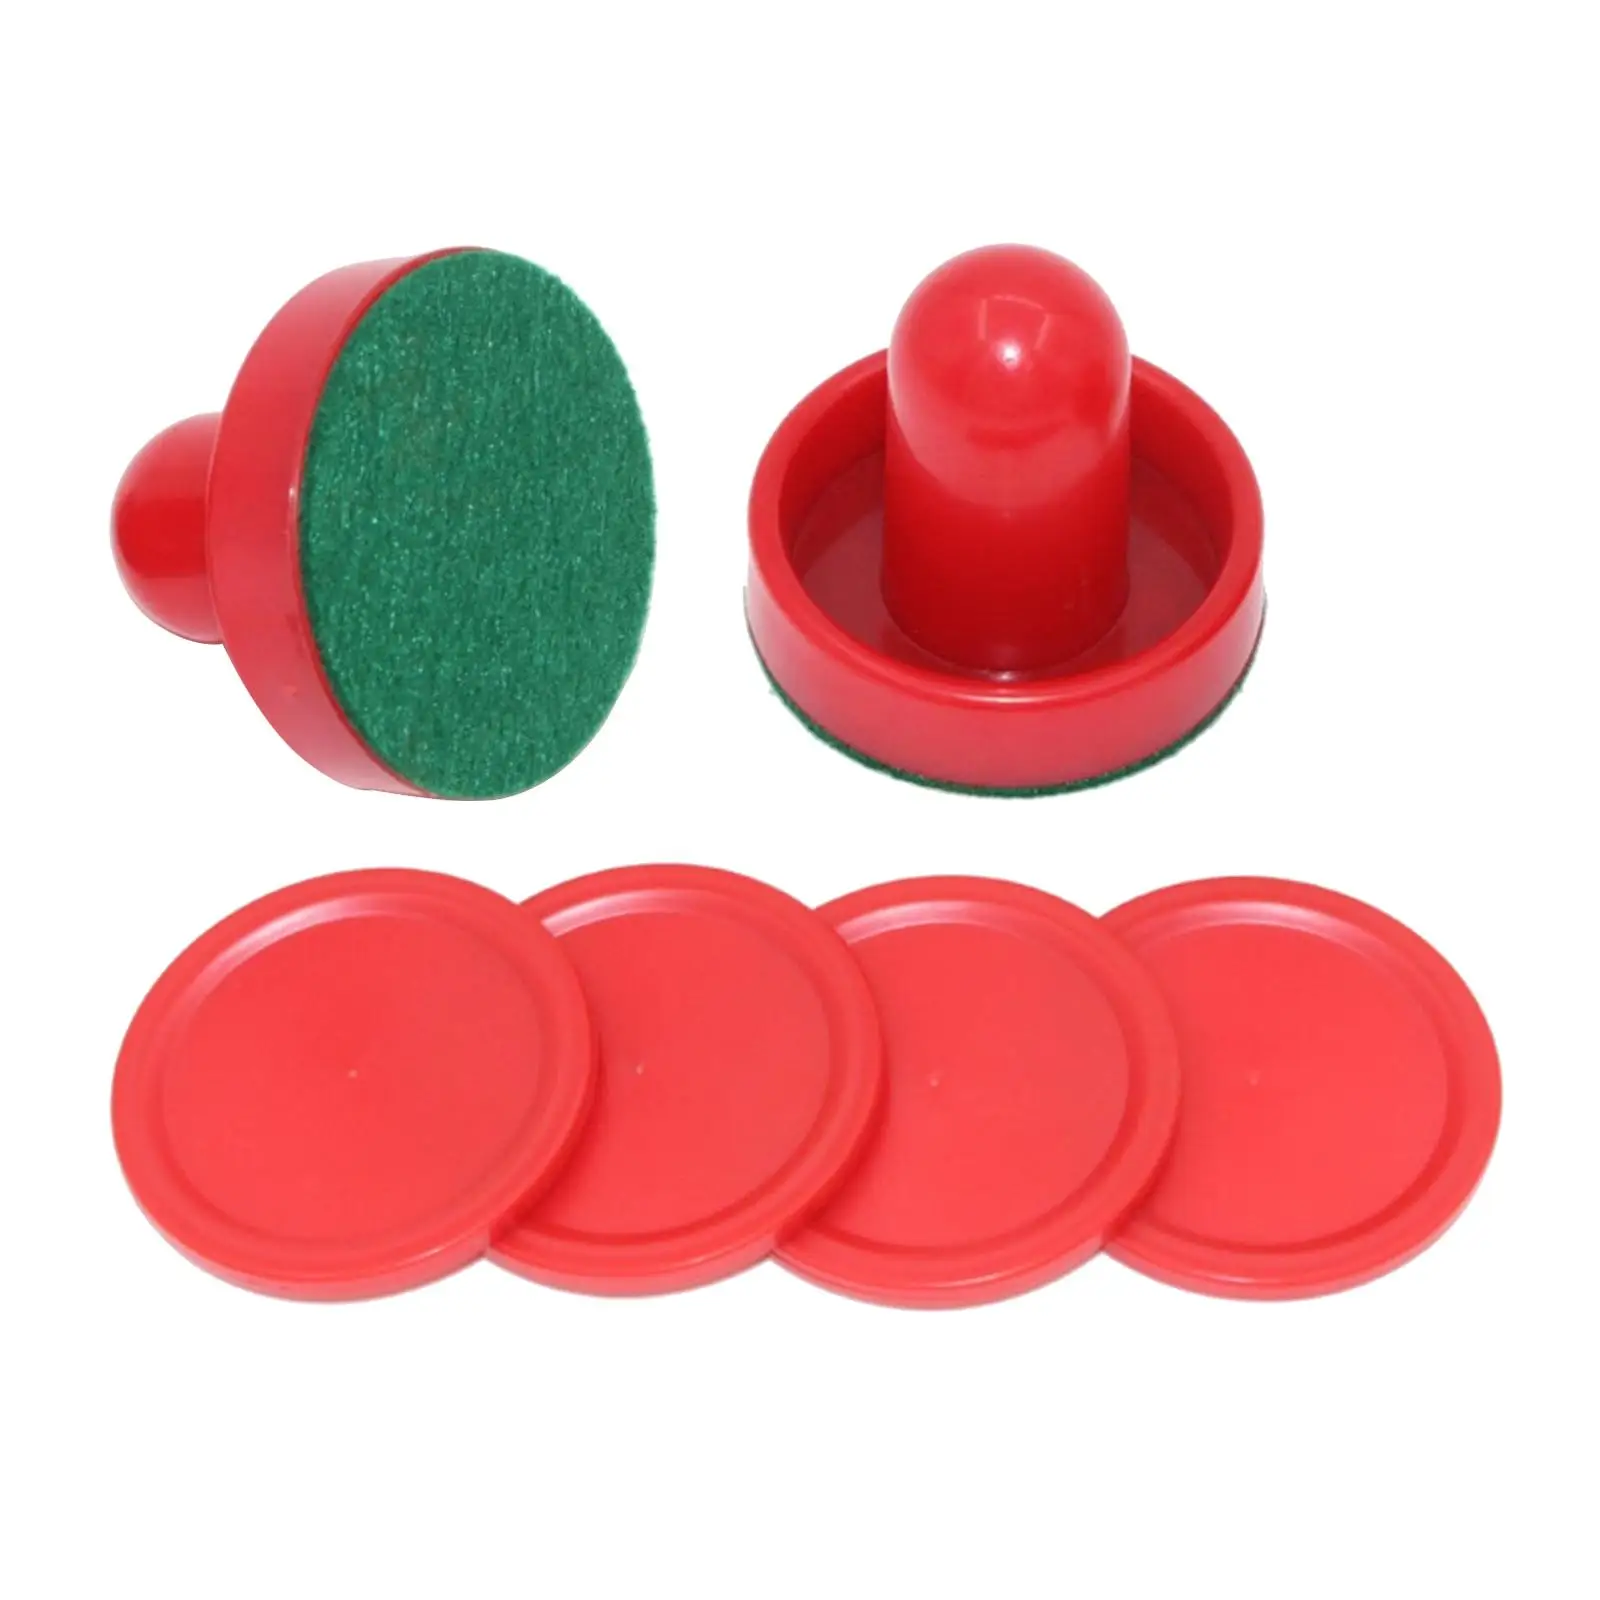 2PCS  Pushers and 4PCS Pucks Game Tables Goalies Equipment Accessories